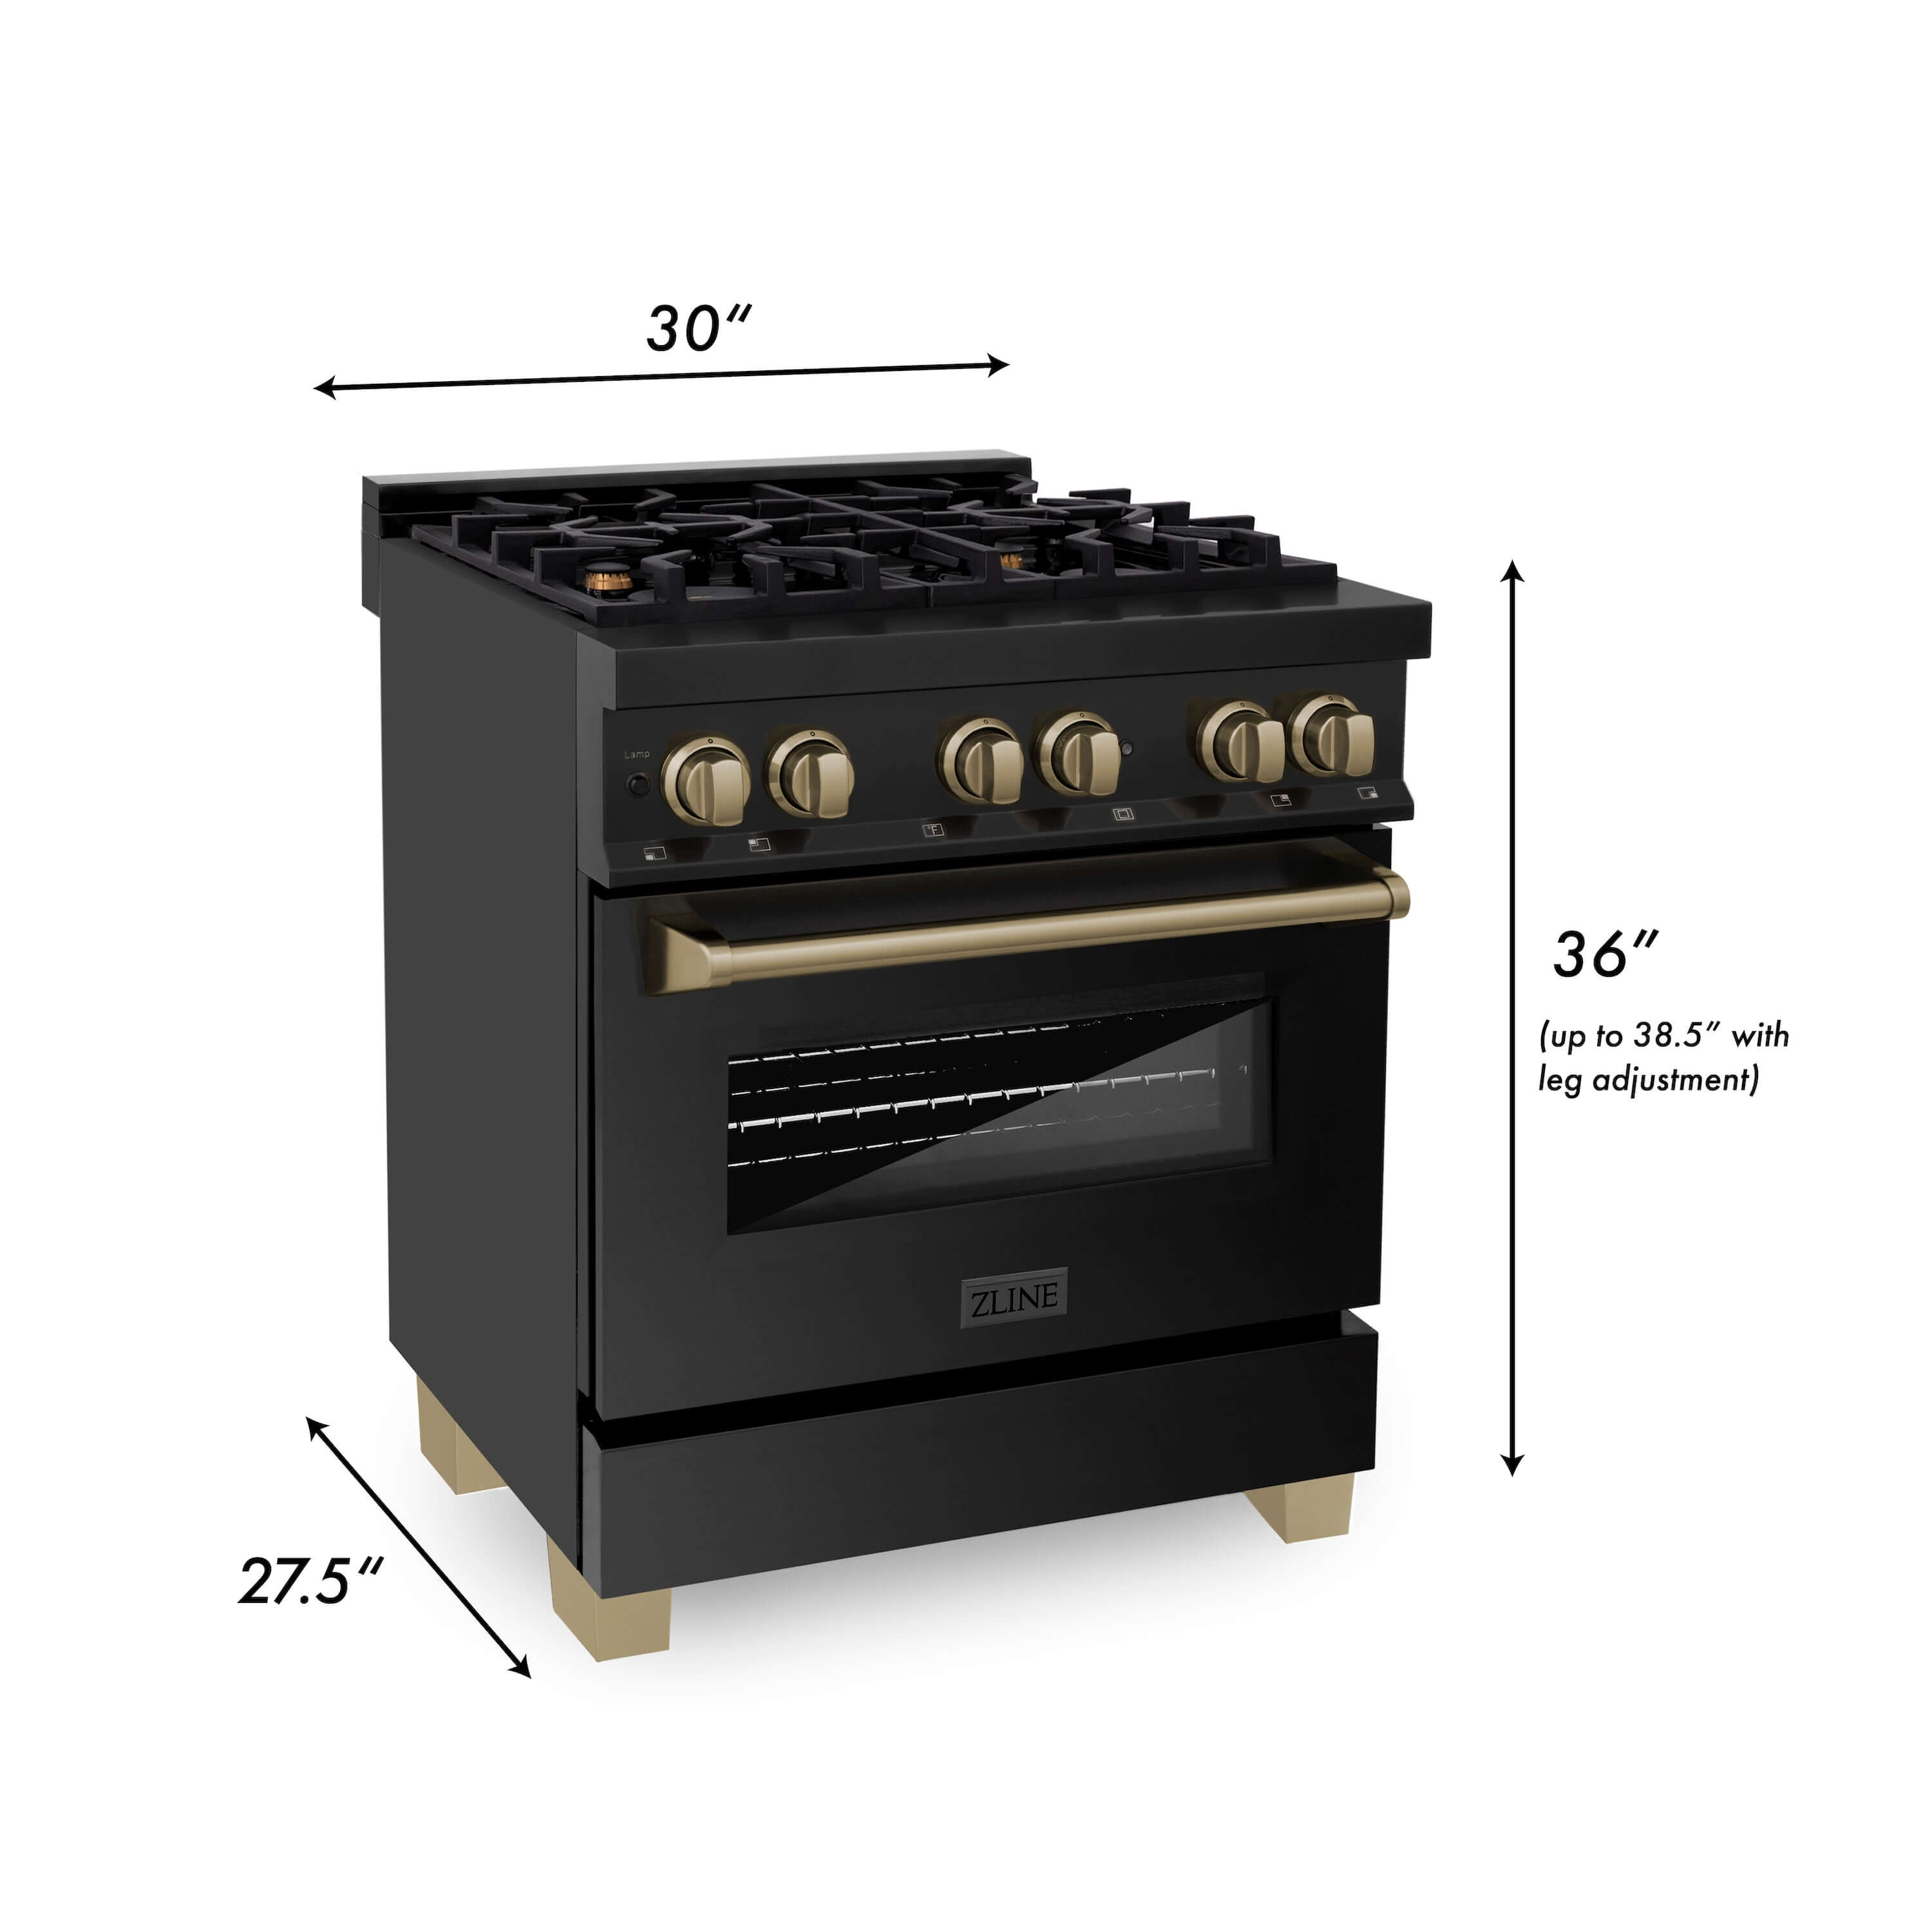 ZLINE Autograph Edition 30" Black Stainless Steel Dual Fuel Range with Champagne Bronze accents dimensions.